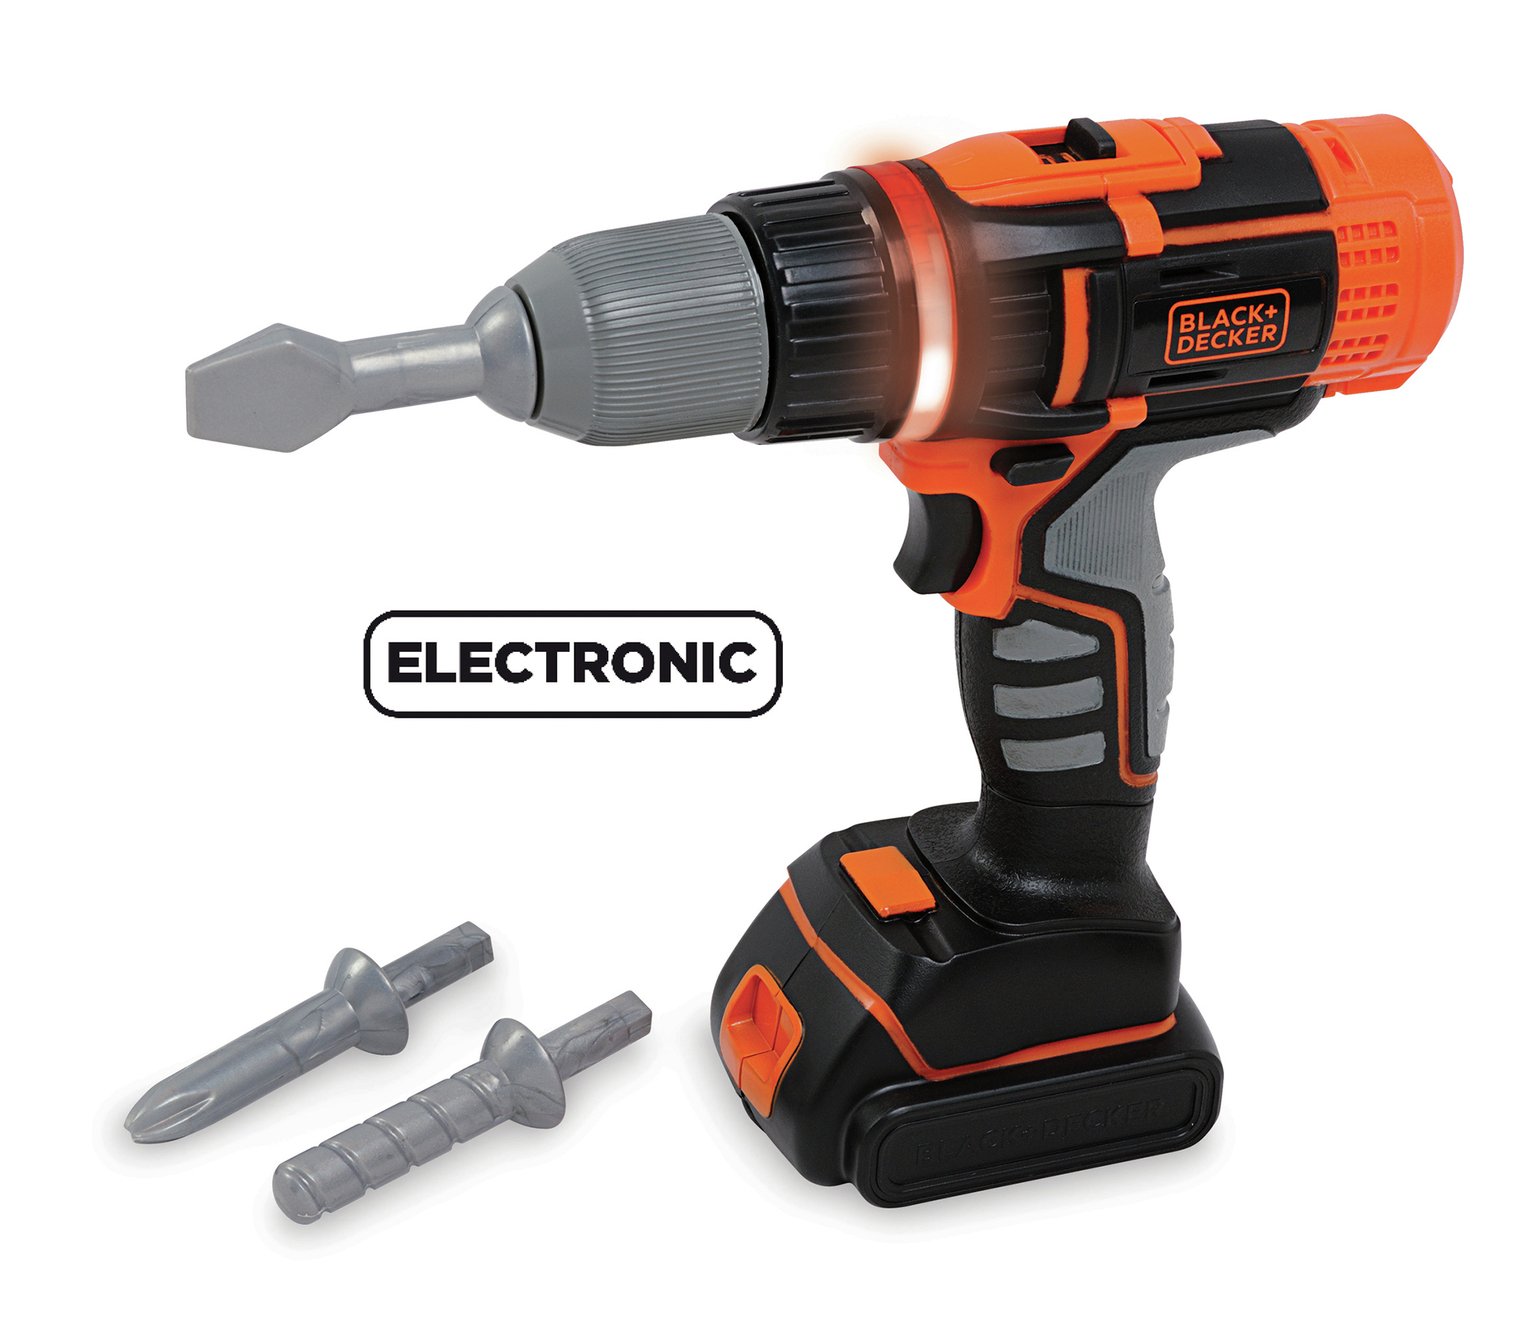 Smoby Toy Black + Decker Electric Drill 